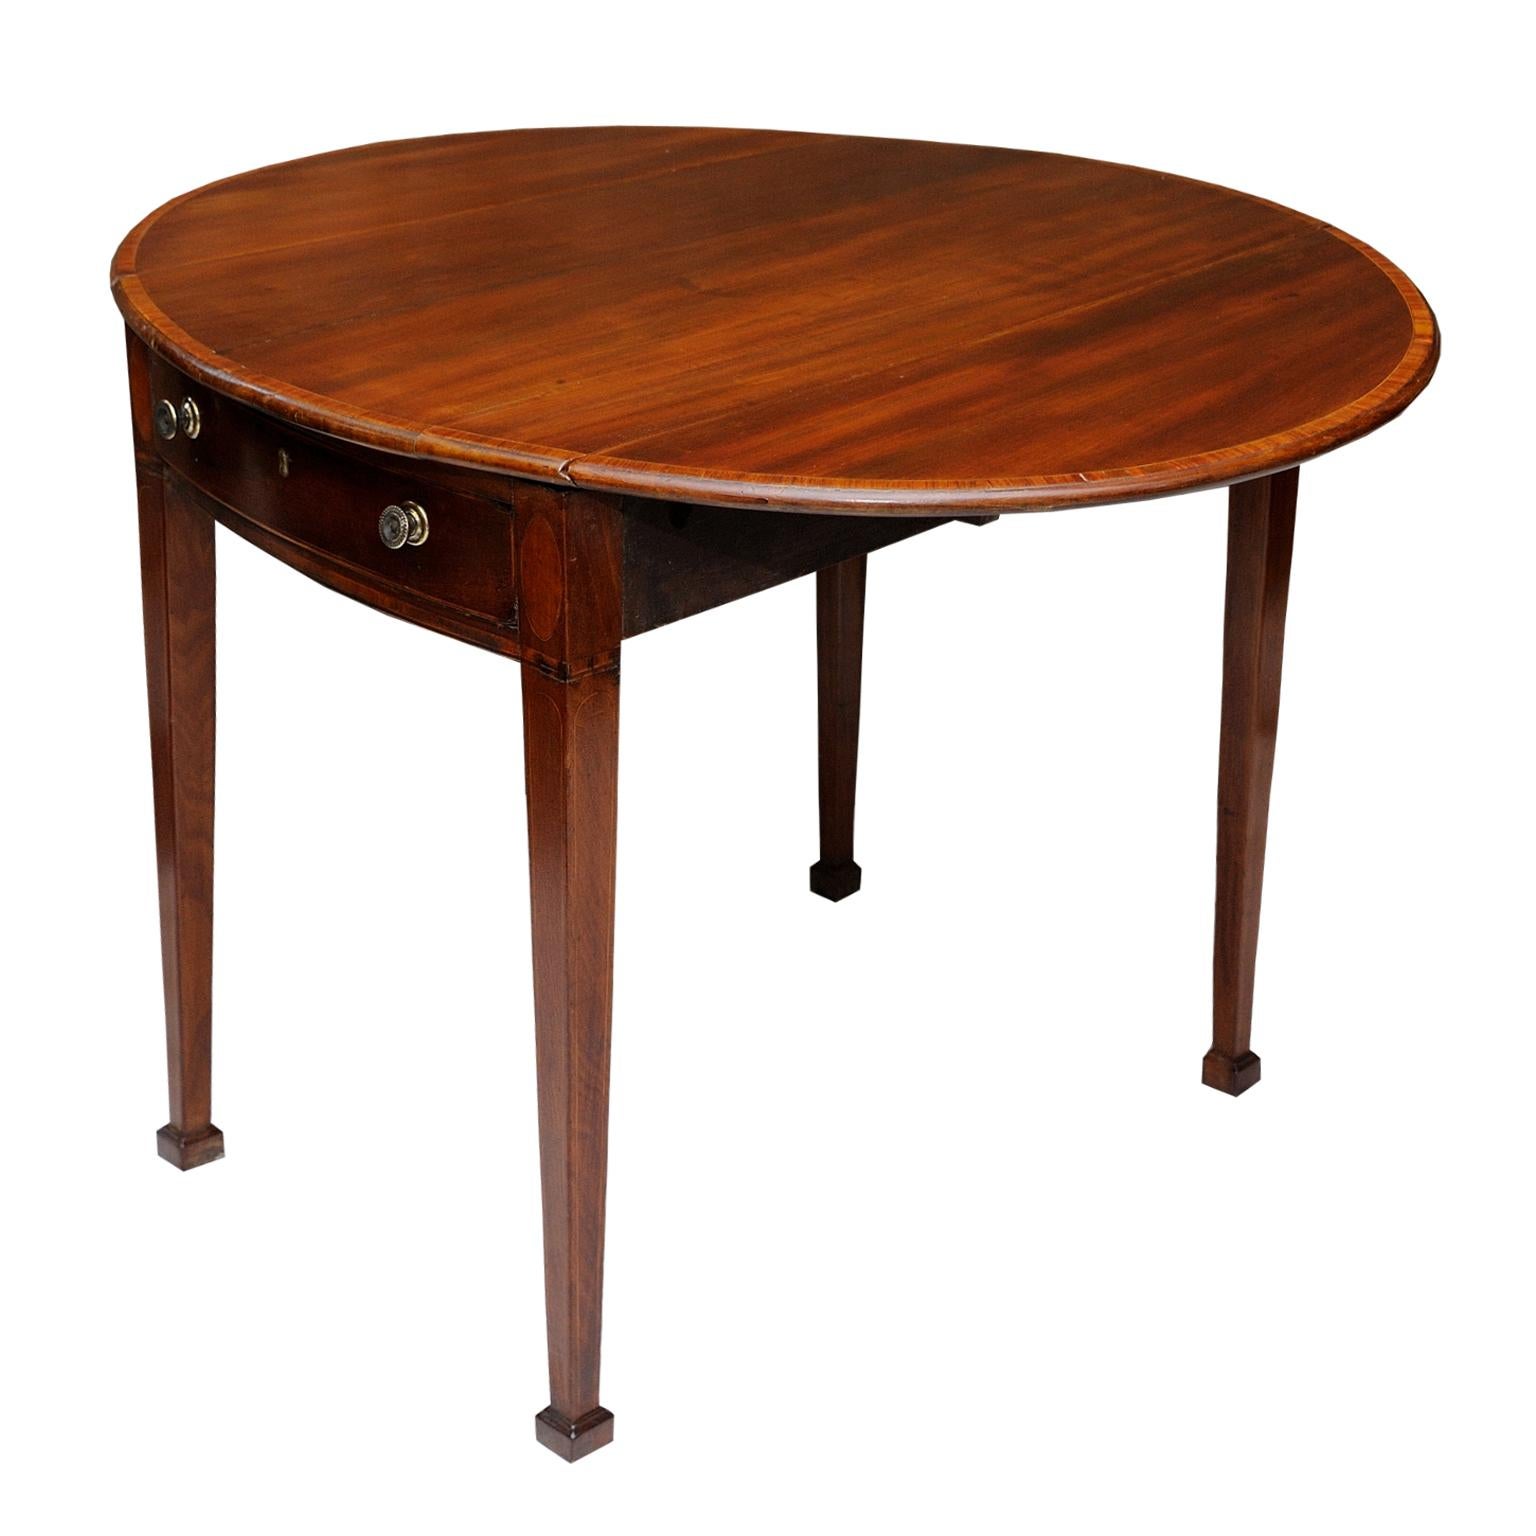 This is a rather lovely English George III Hepplewhite period mahogany oval Pembroke table, with one opening drawer and one faux drawer. Decorated with crossbanding and standing on tapered legs with square toes and retaining original handles, circa